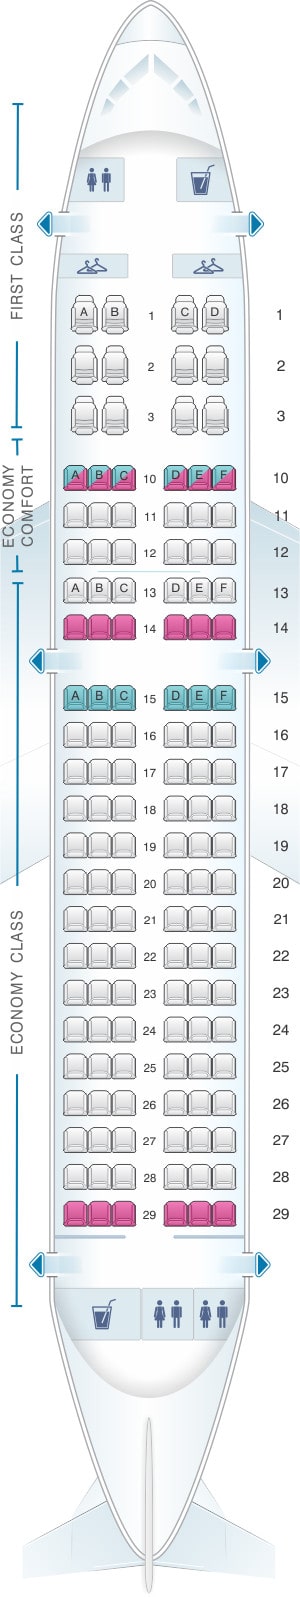 Airbus A319 Delta Seat Map